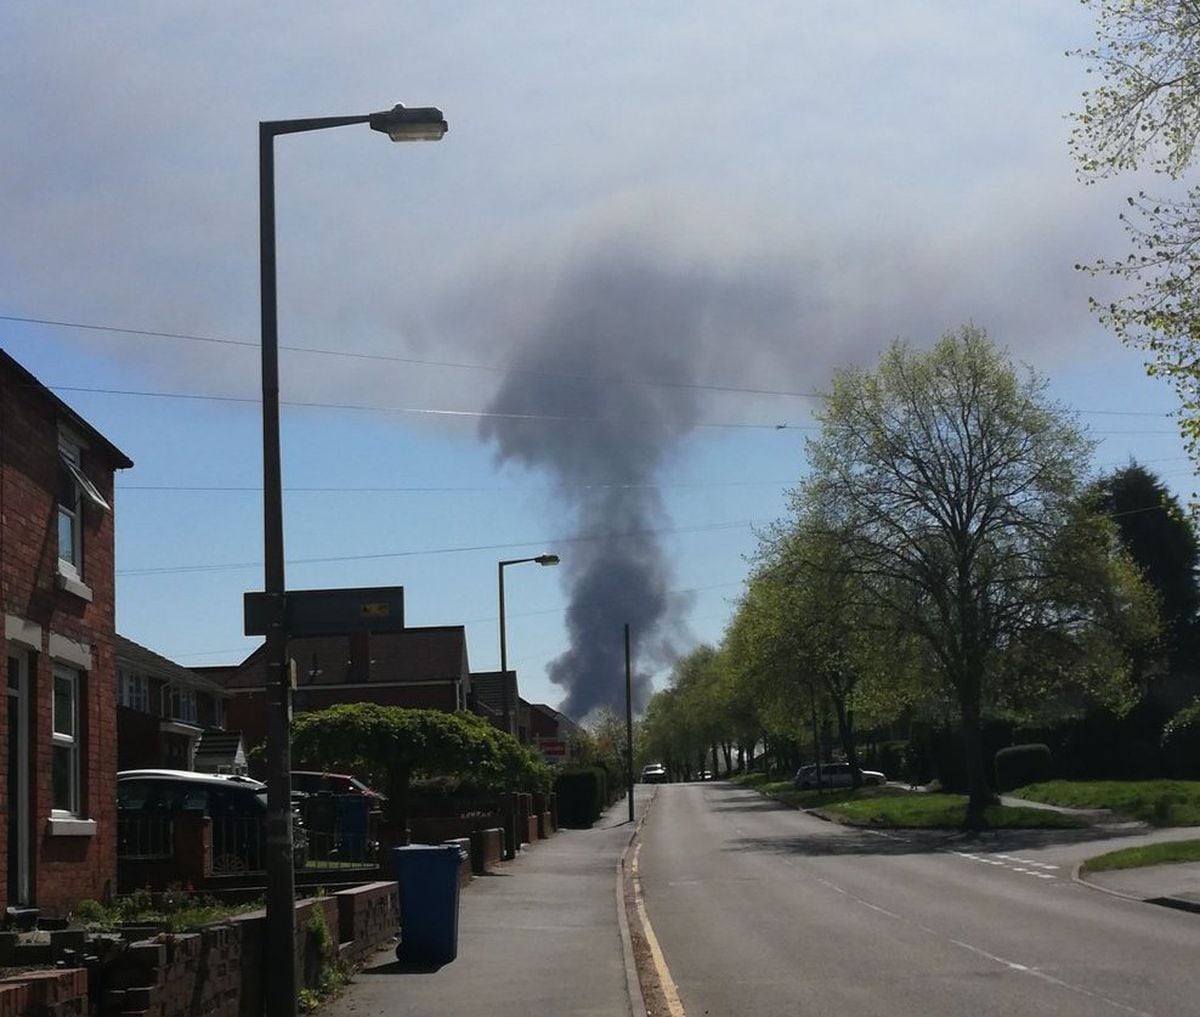 The view from Brownshore Lane in Essington. Photo: Emma Bennett